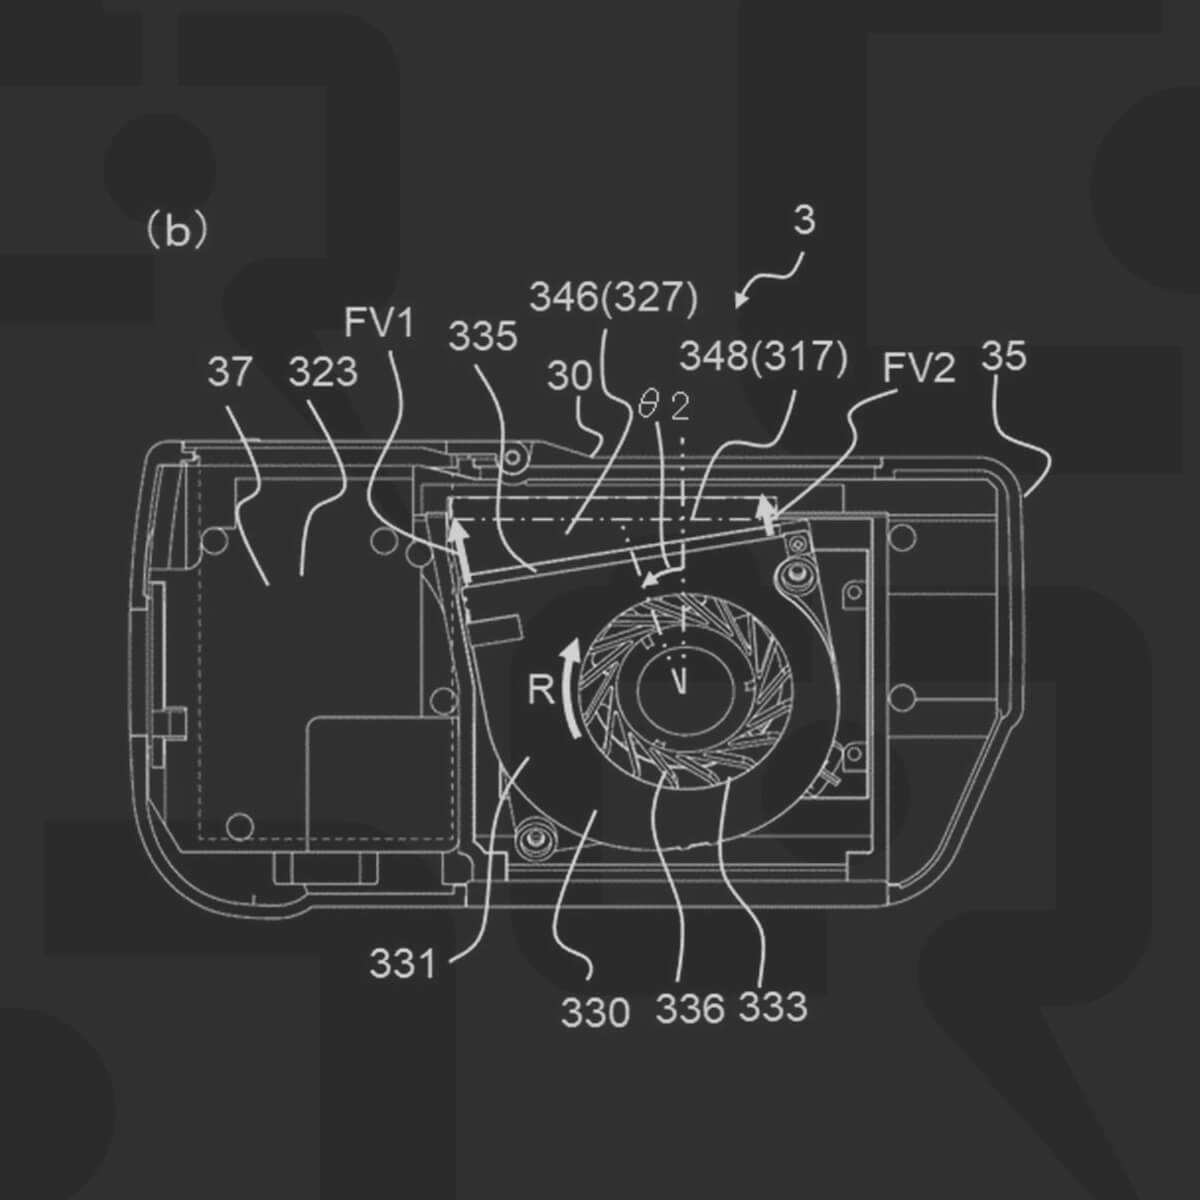 2022030864 07 - The latest patent suggests Canon will be bringing an active cooling grip for EOS R cameras